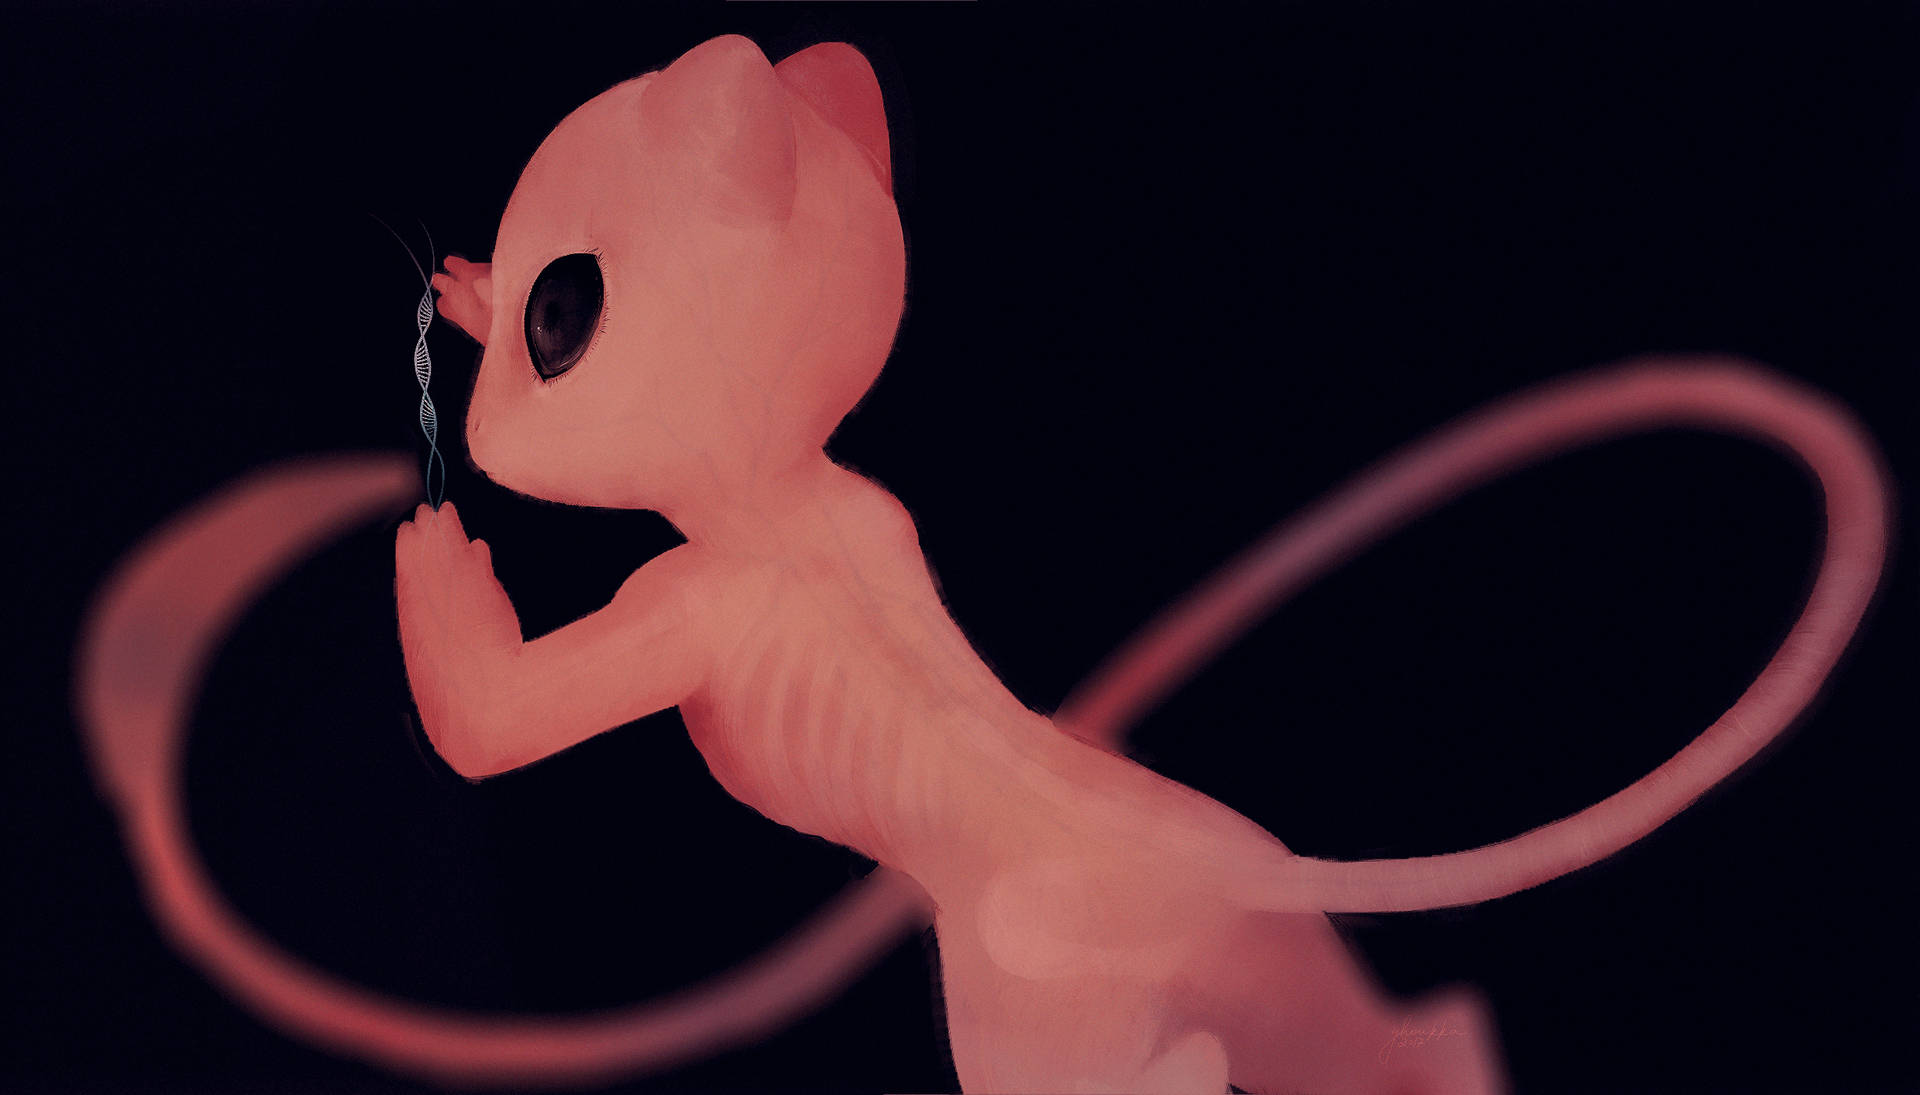 Enter the Mysterious World of Mew Wallpaper